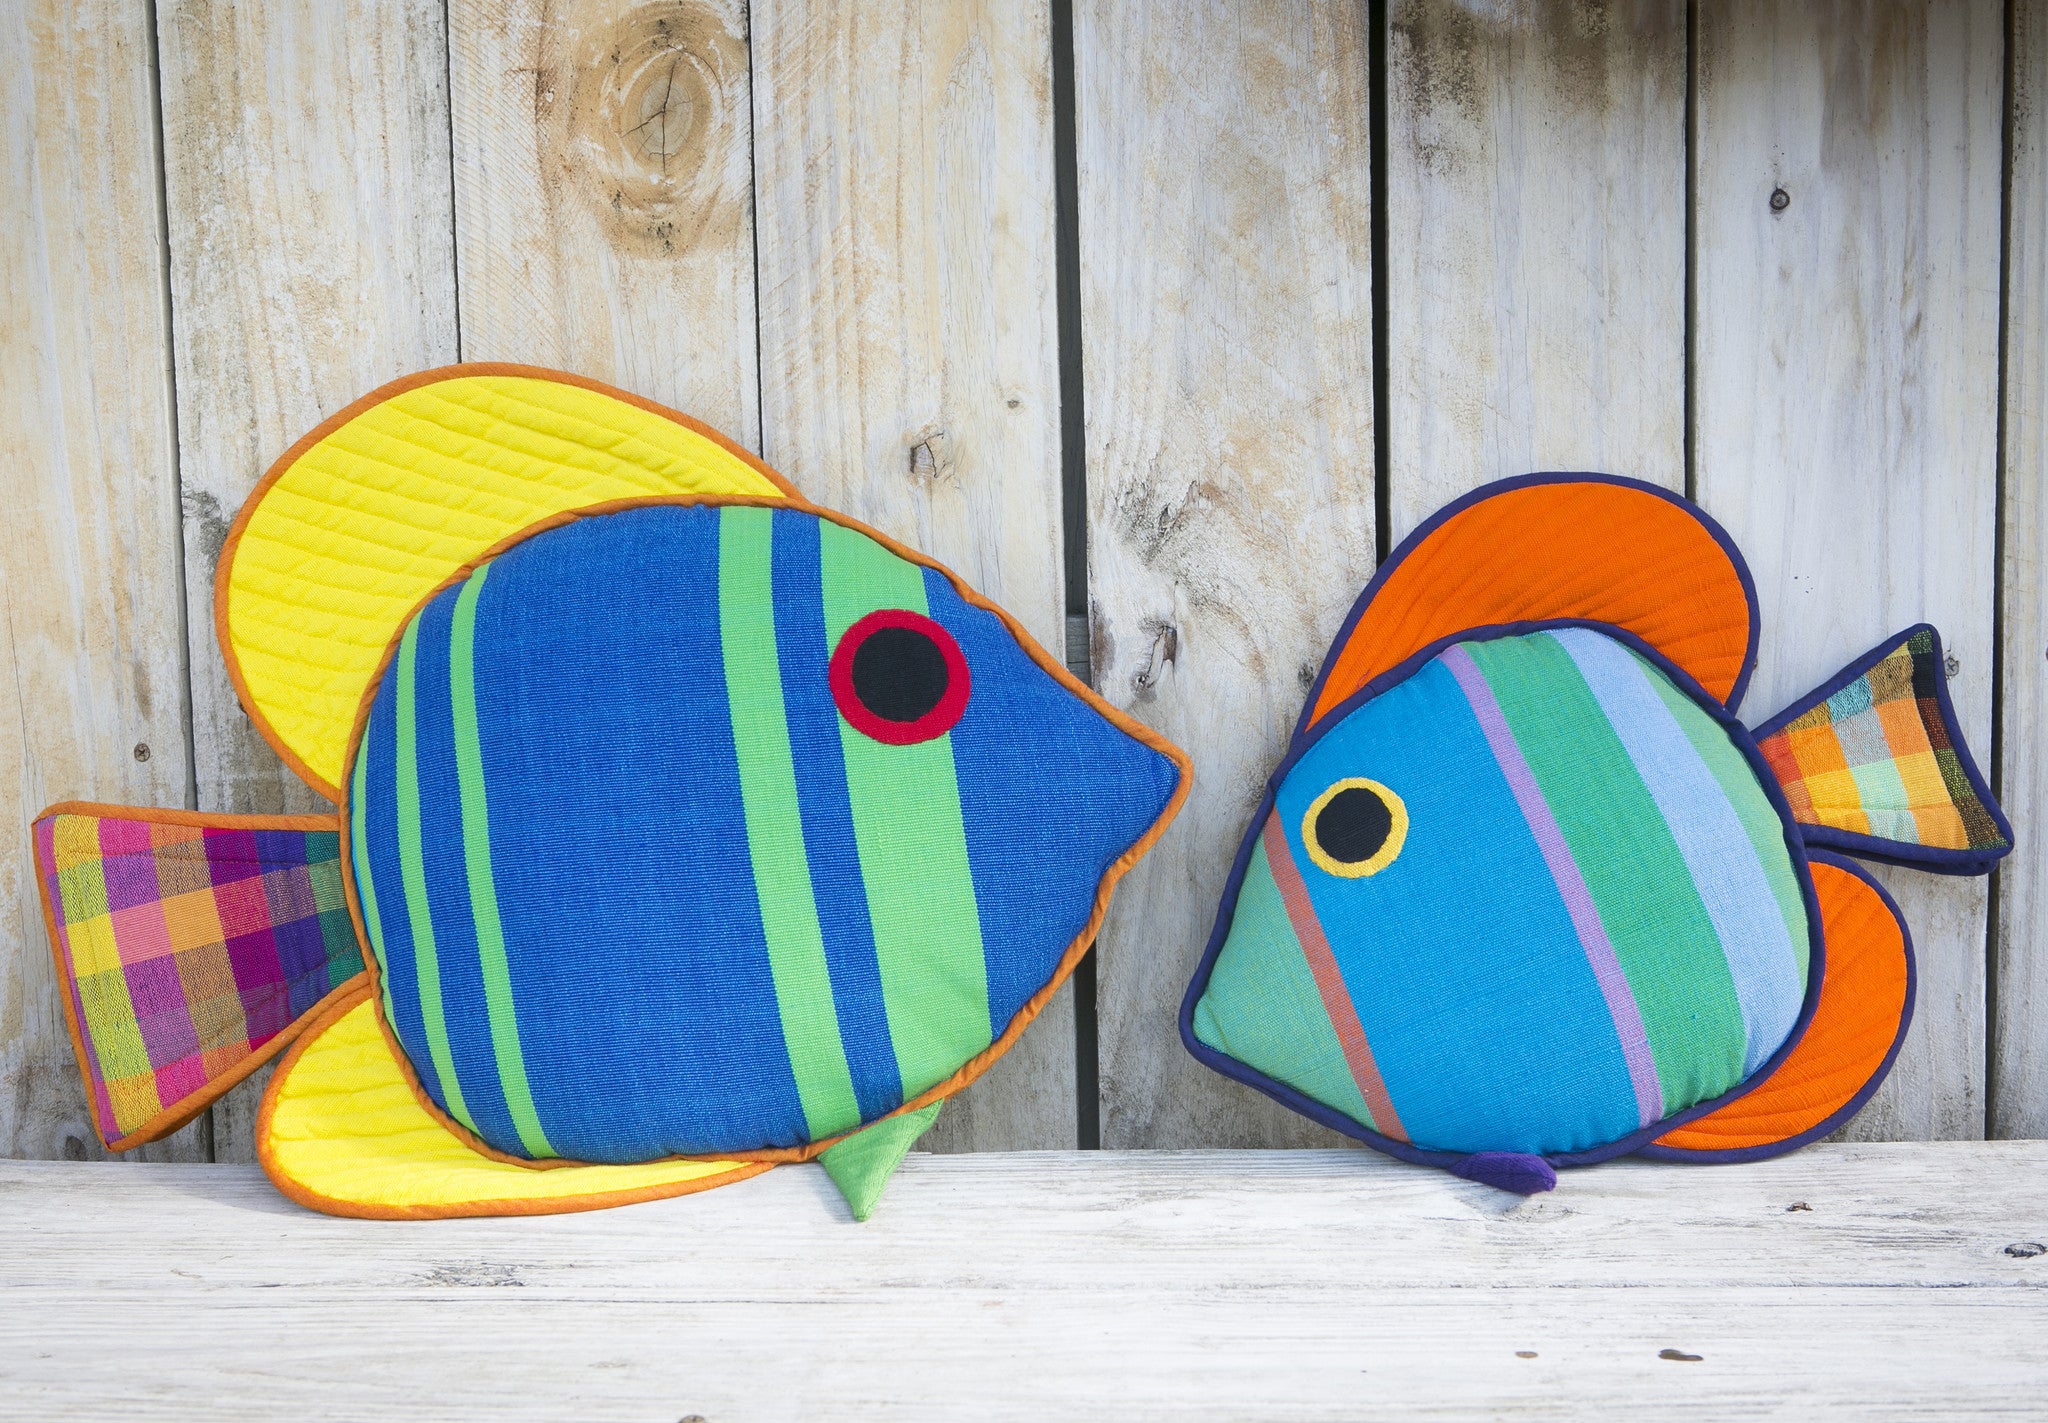 The Sail Fin Fish – Taking a break out of their day! (Henry shown in large size & Cooper in small size)